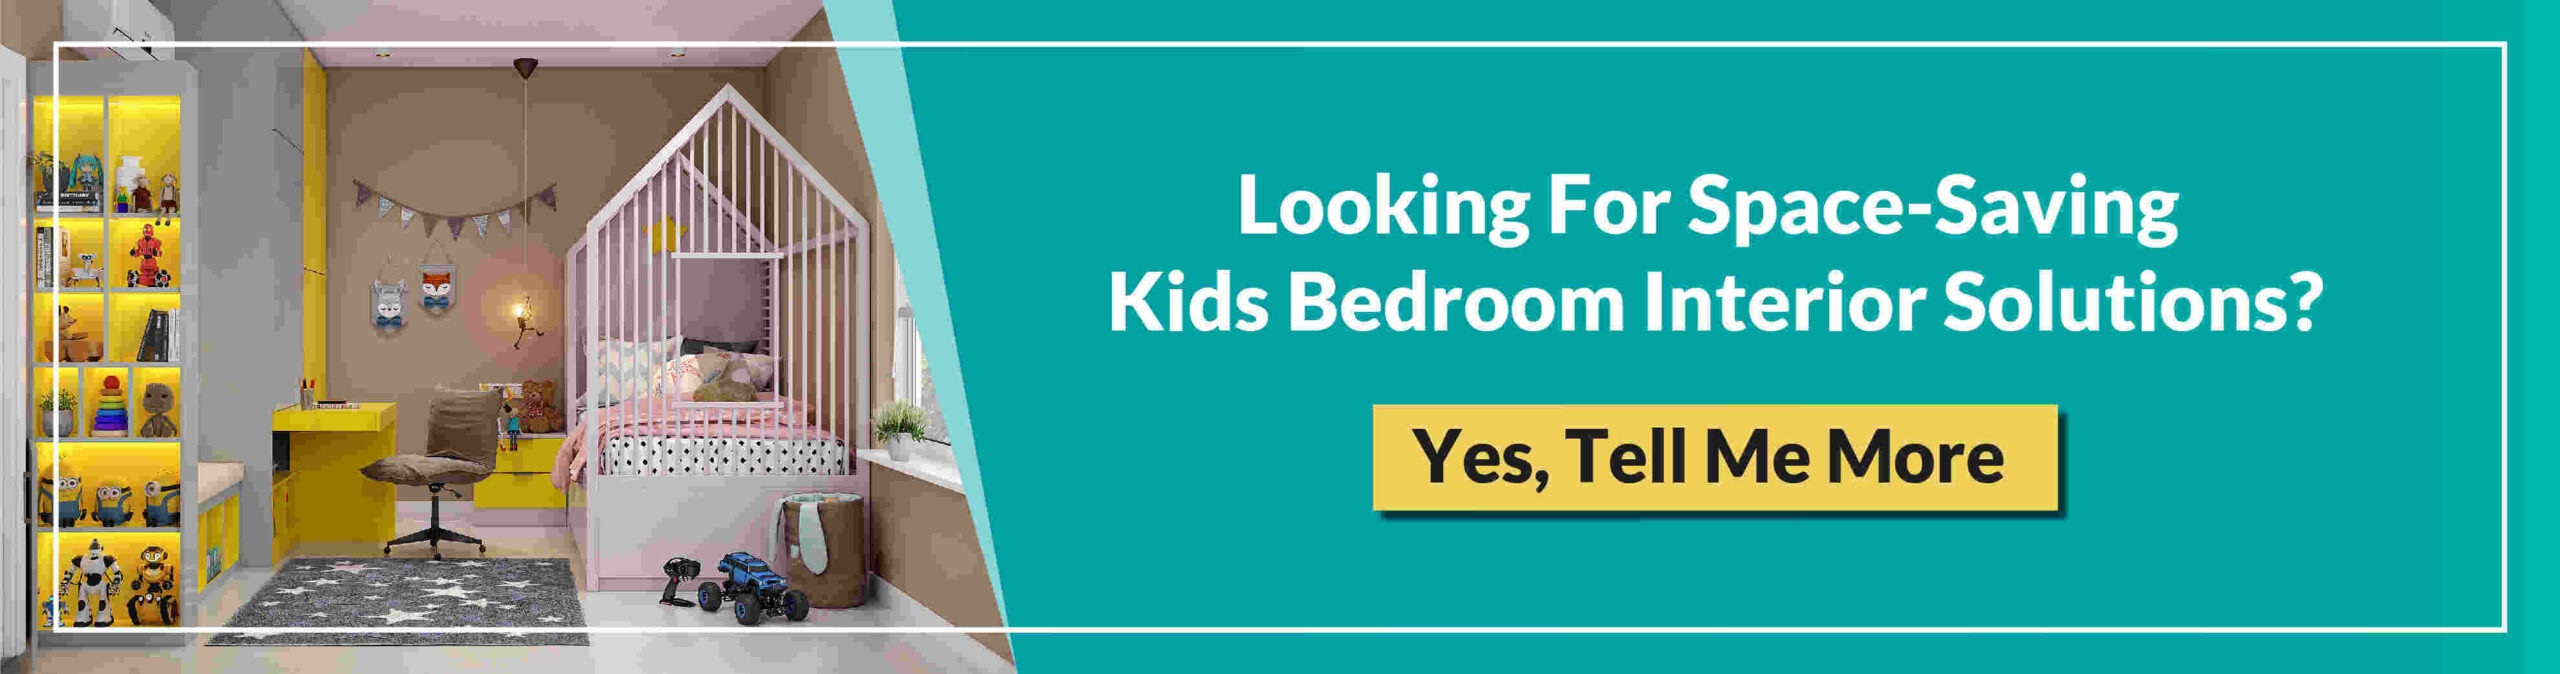 looking for space saving Kid's bedroom interior solutions